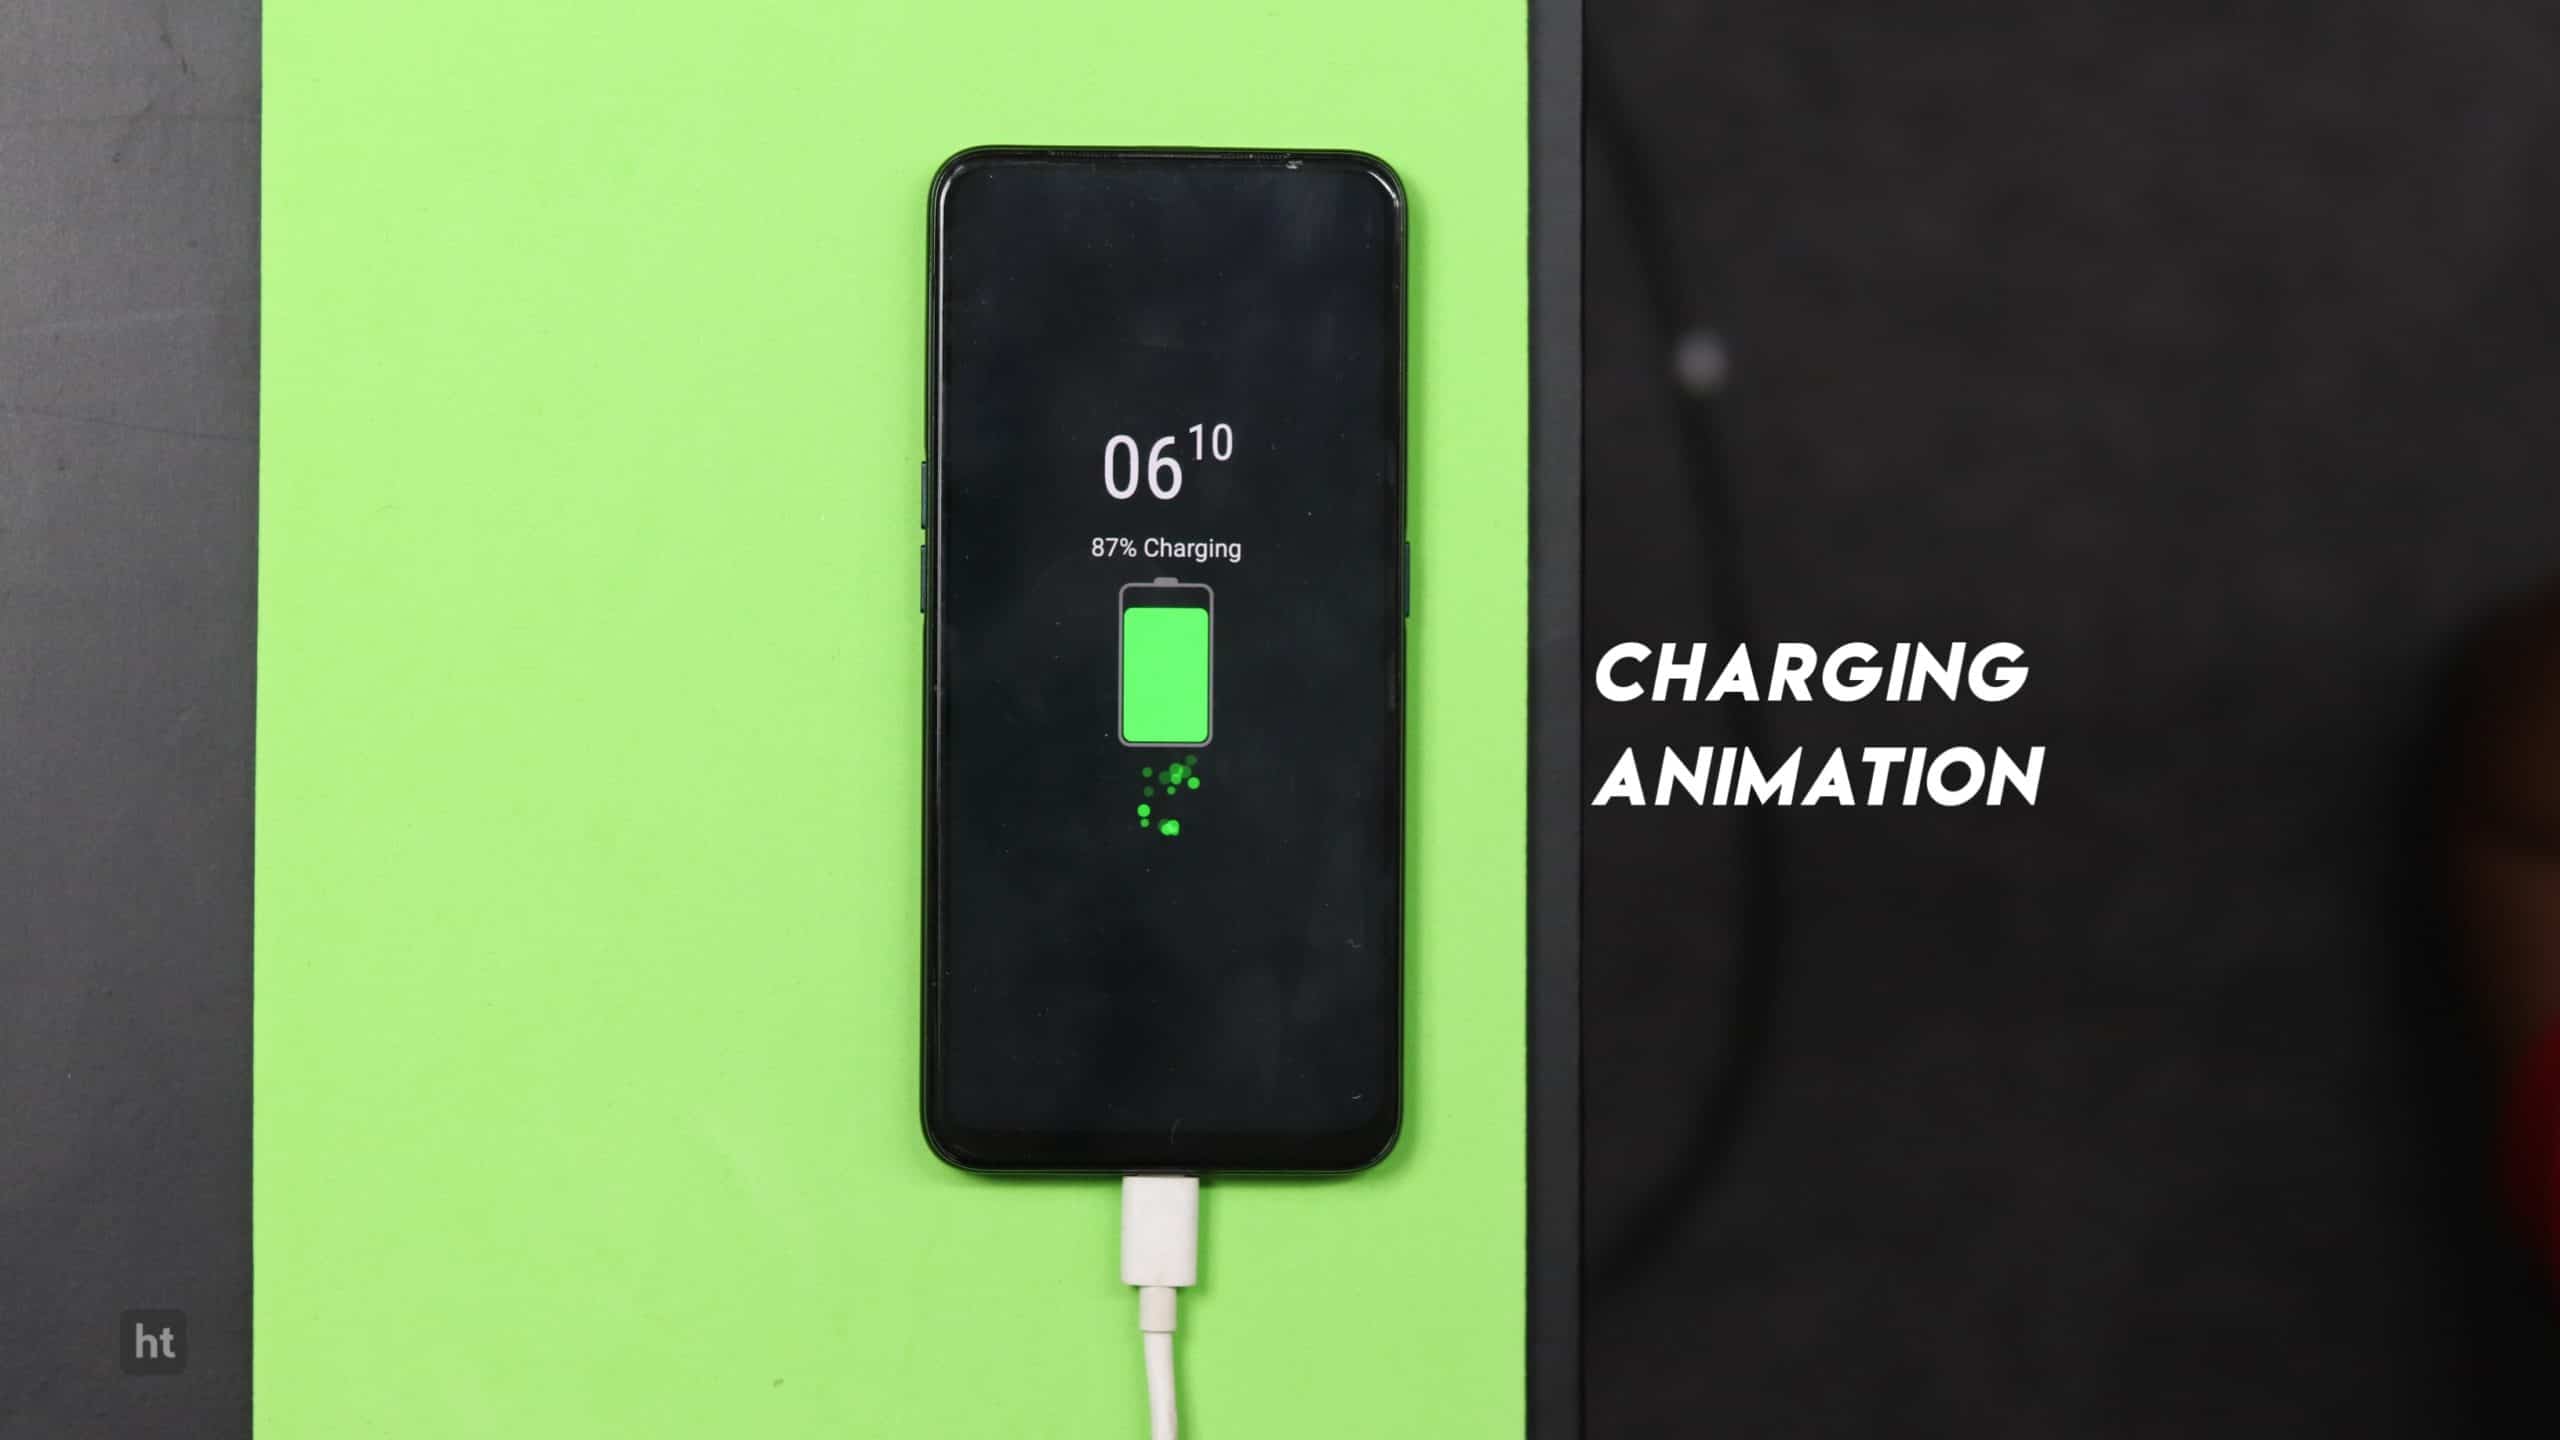 Battery charging animation android app when pluging the smartphone.